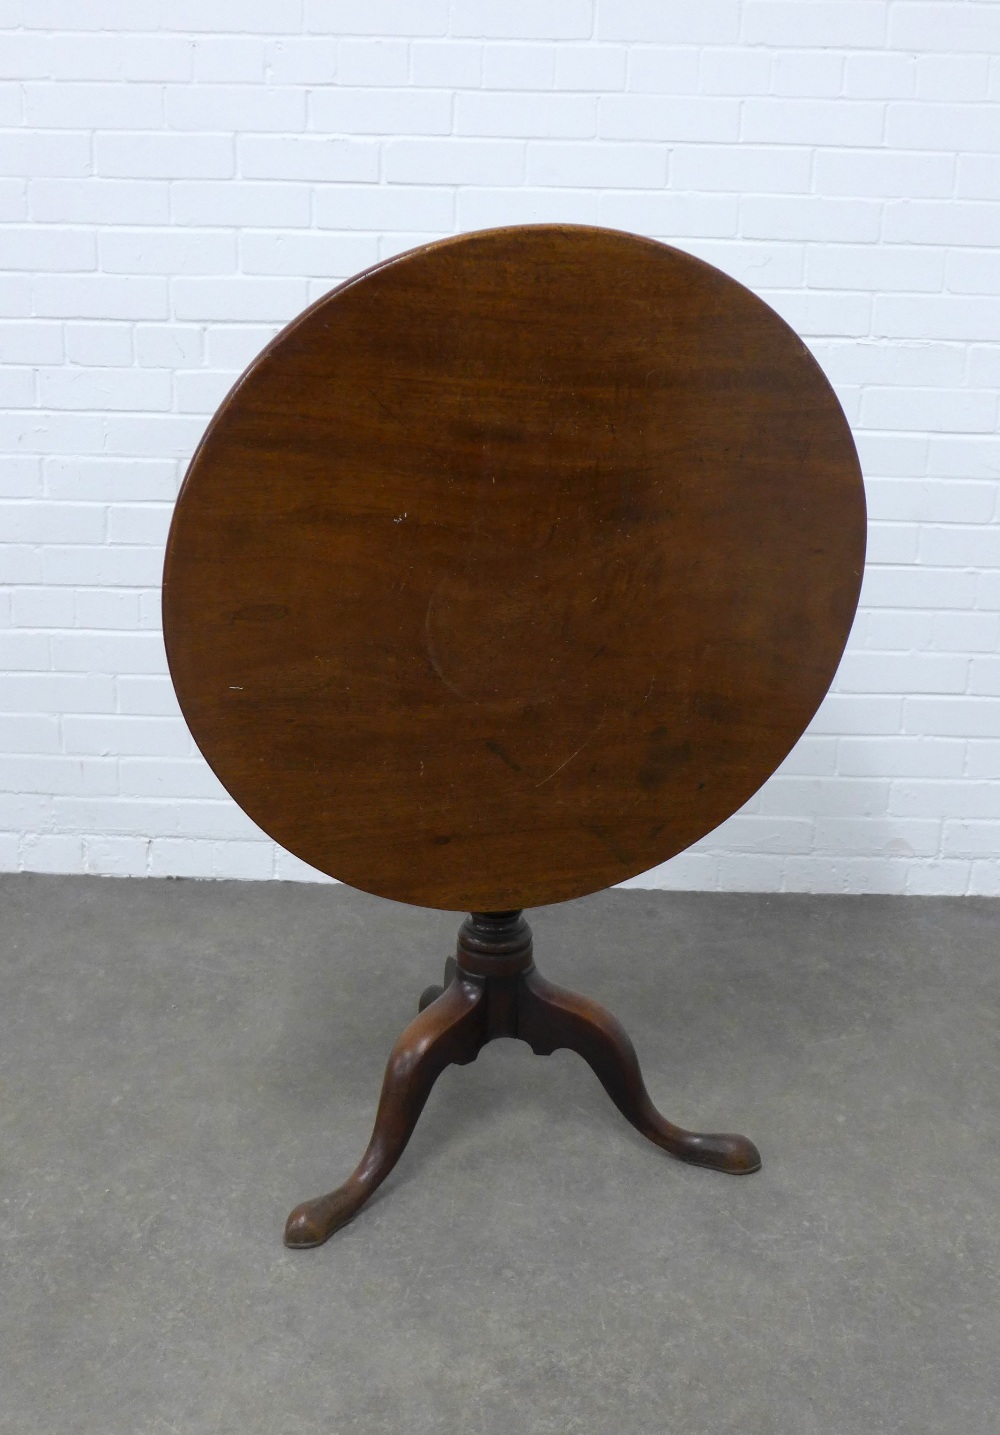 19th century mahogany tilt top table, plain circular top on a pedestal base with splayed legs and